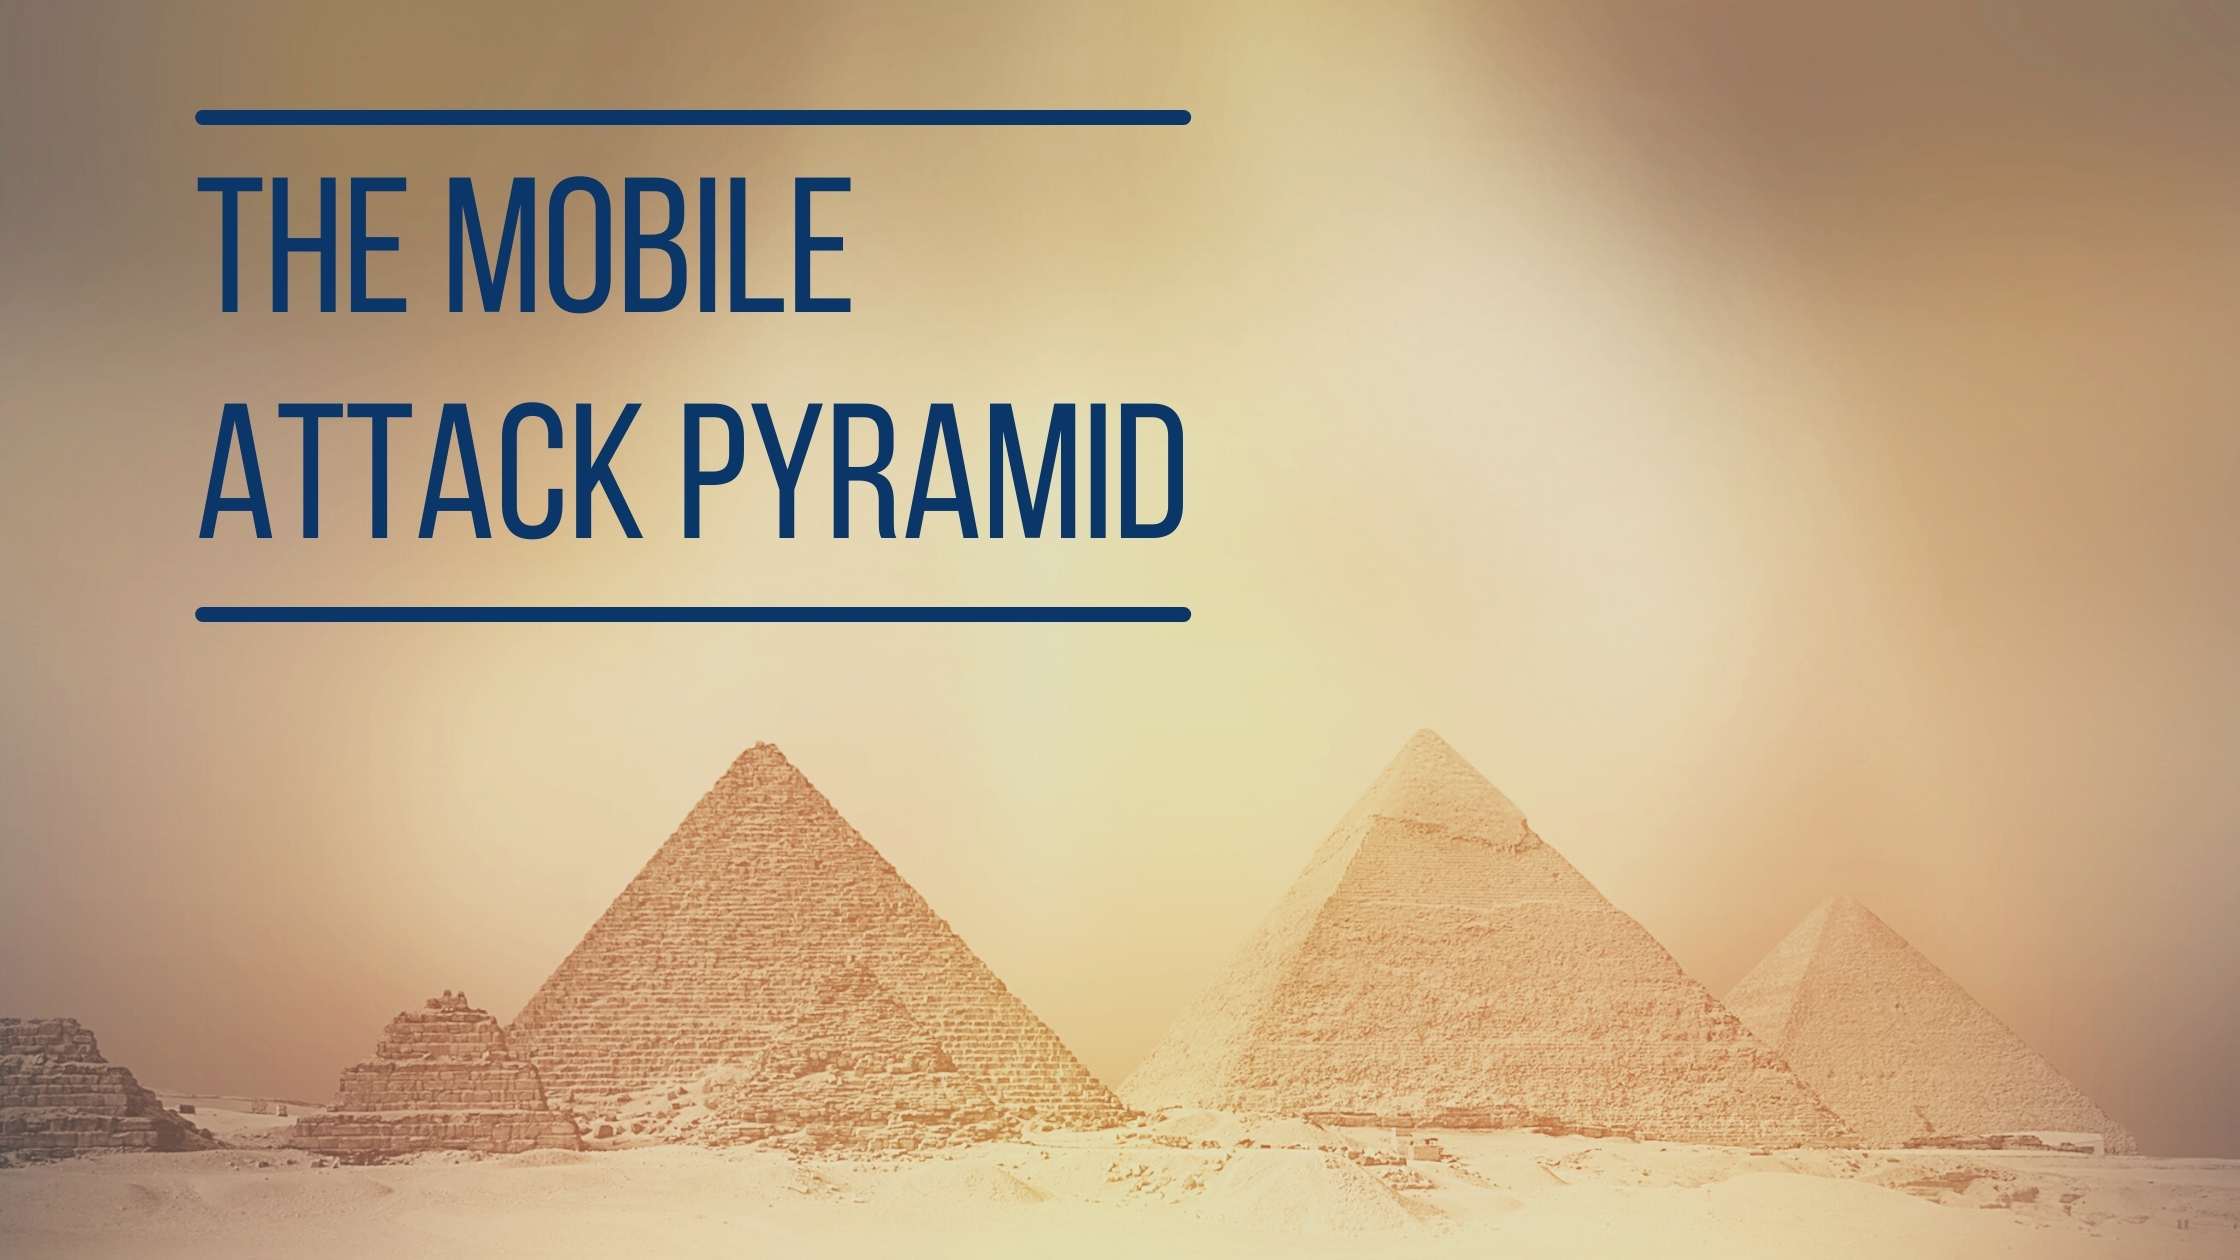 Egyptian pyramids; text 'The Mobile Attack Pyramid' between two horizontal lines